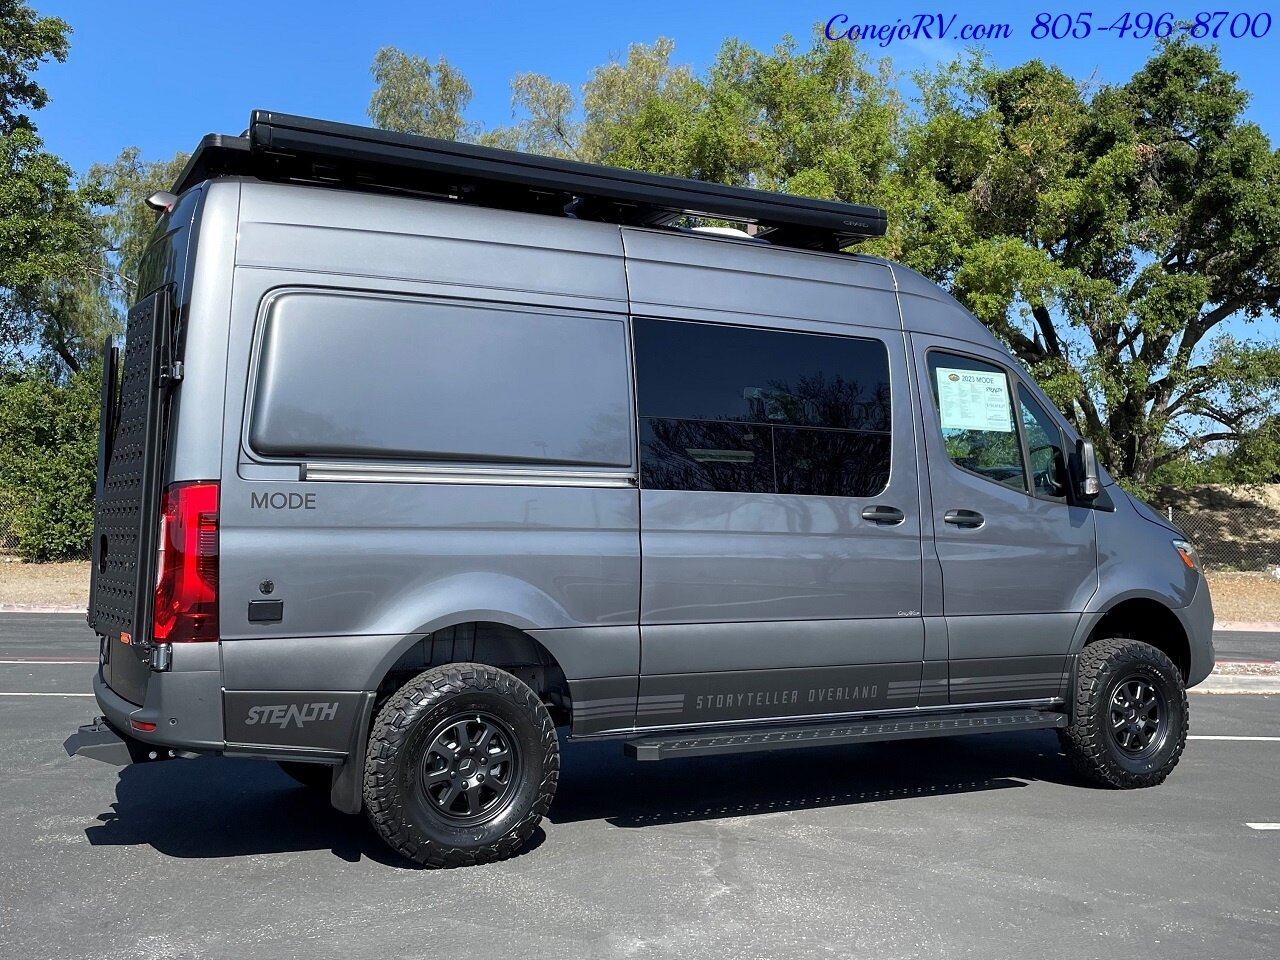 2023 Storyteller Overland Stealth Mode AWD DEALER DEMO 4 cyl H.O.with 9 Speed  Transmission - Photo 4 - Thousand Oaks, CA 91360